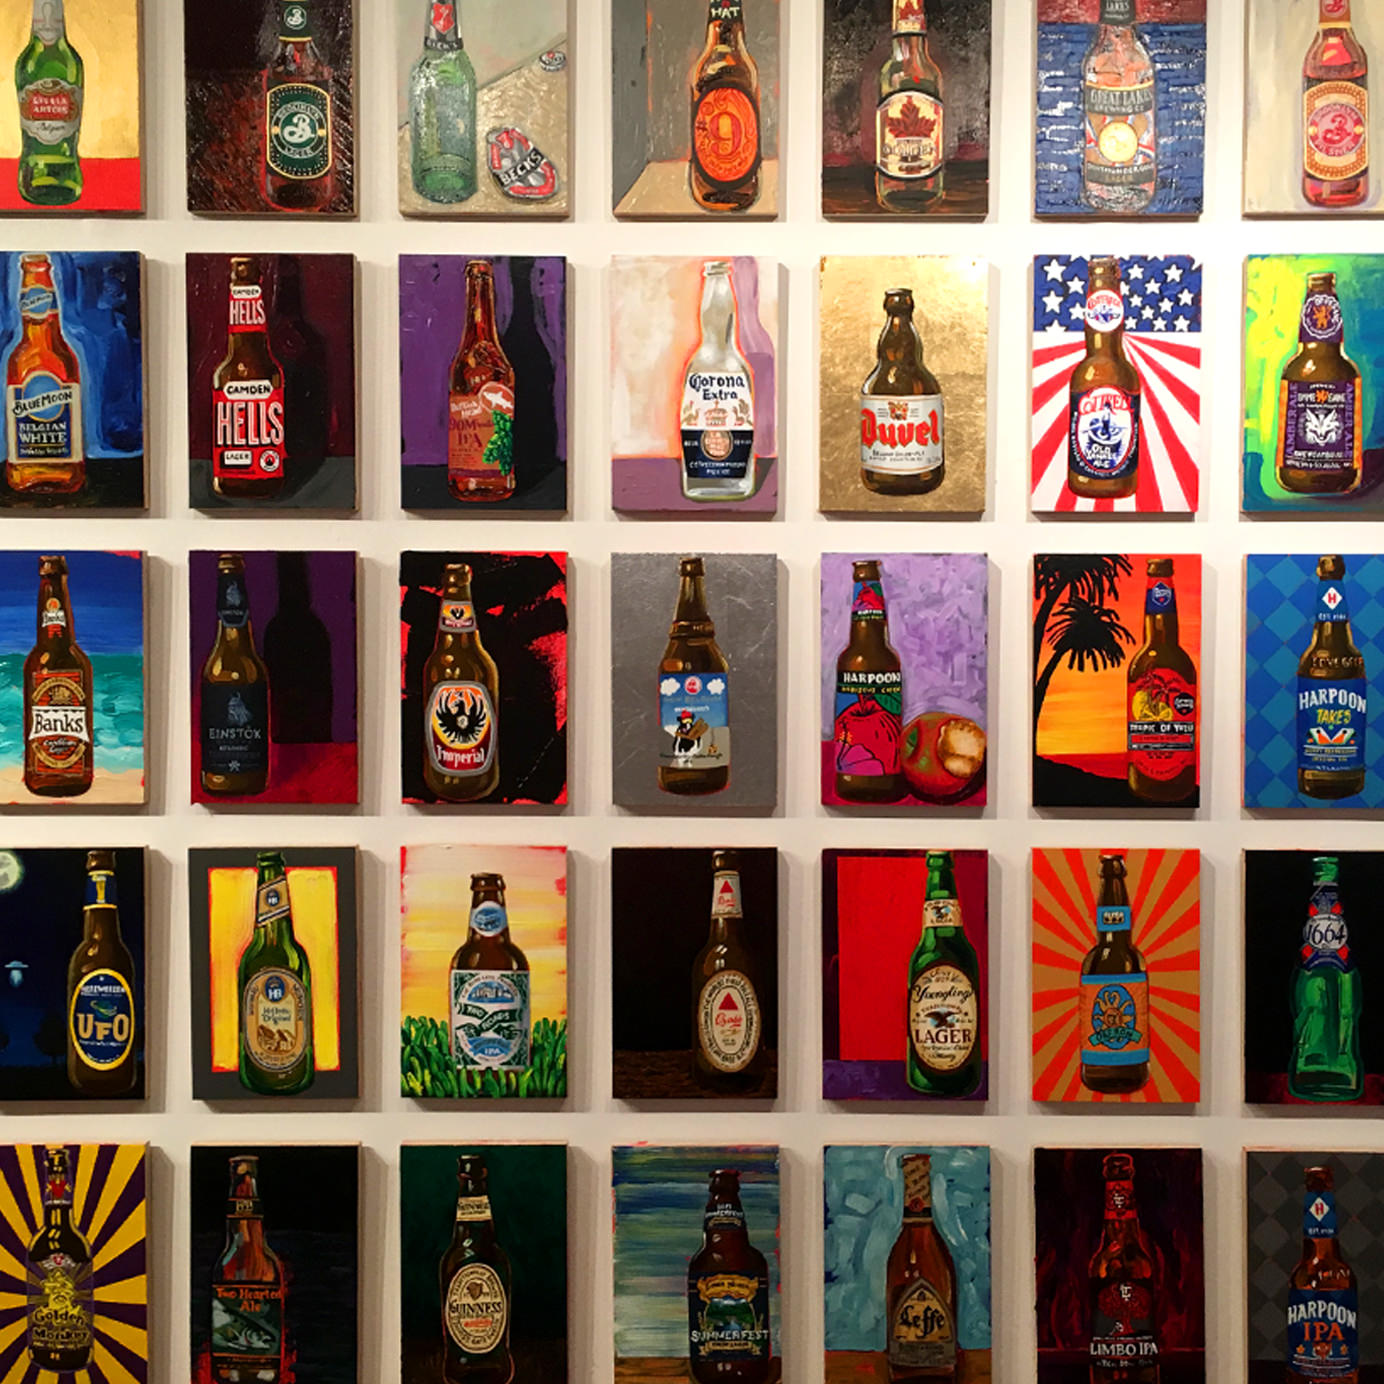 This Artist Painted 99 Beers and Hung Them on a Wall